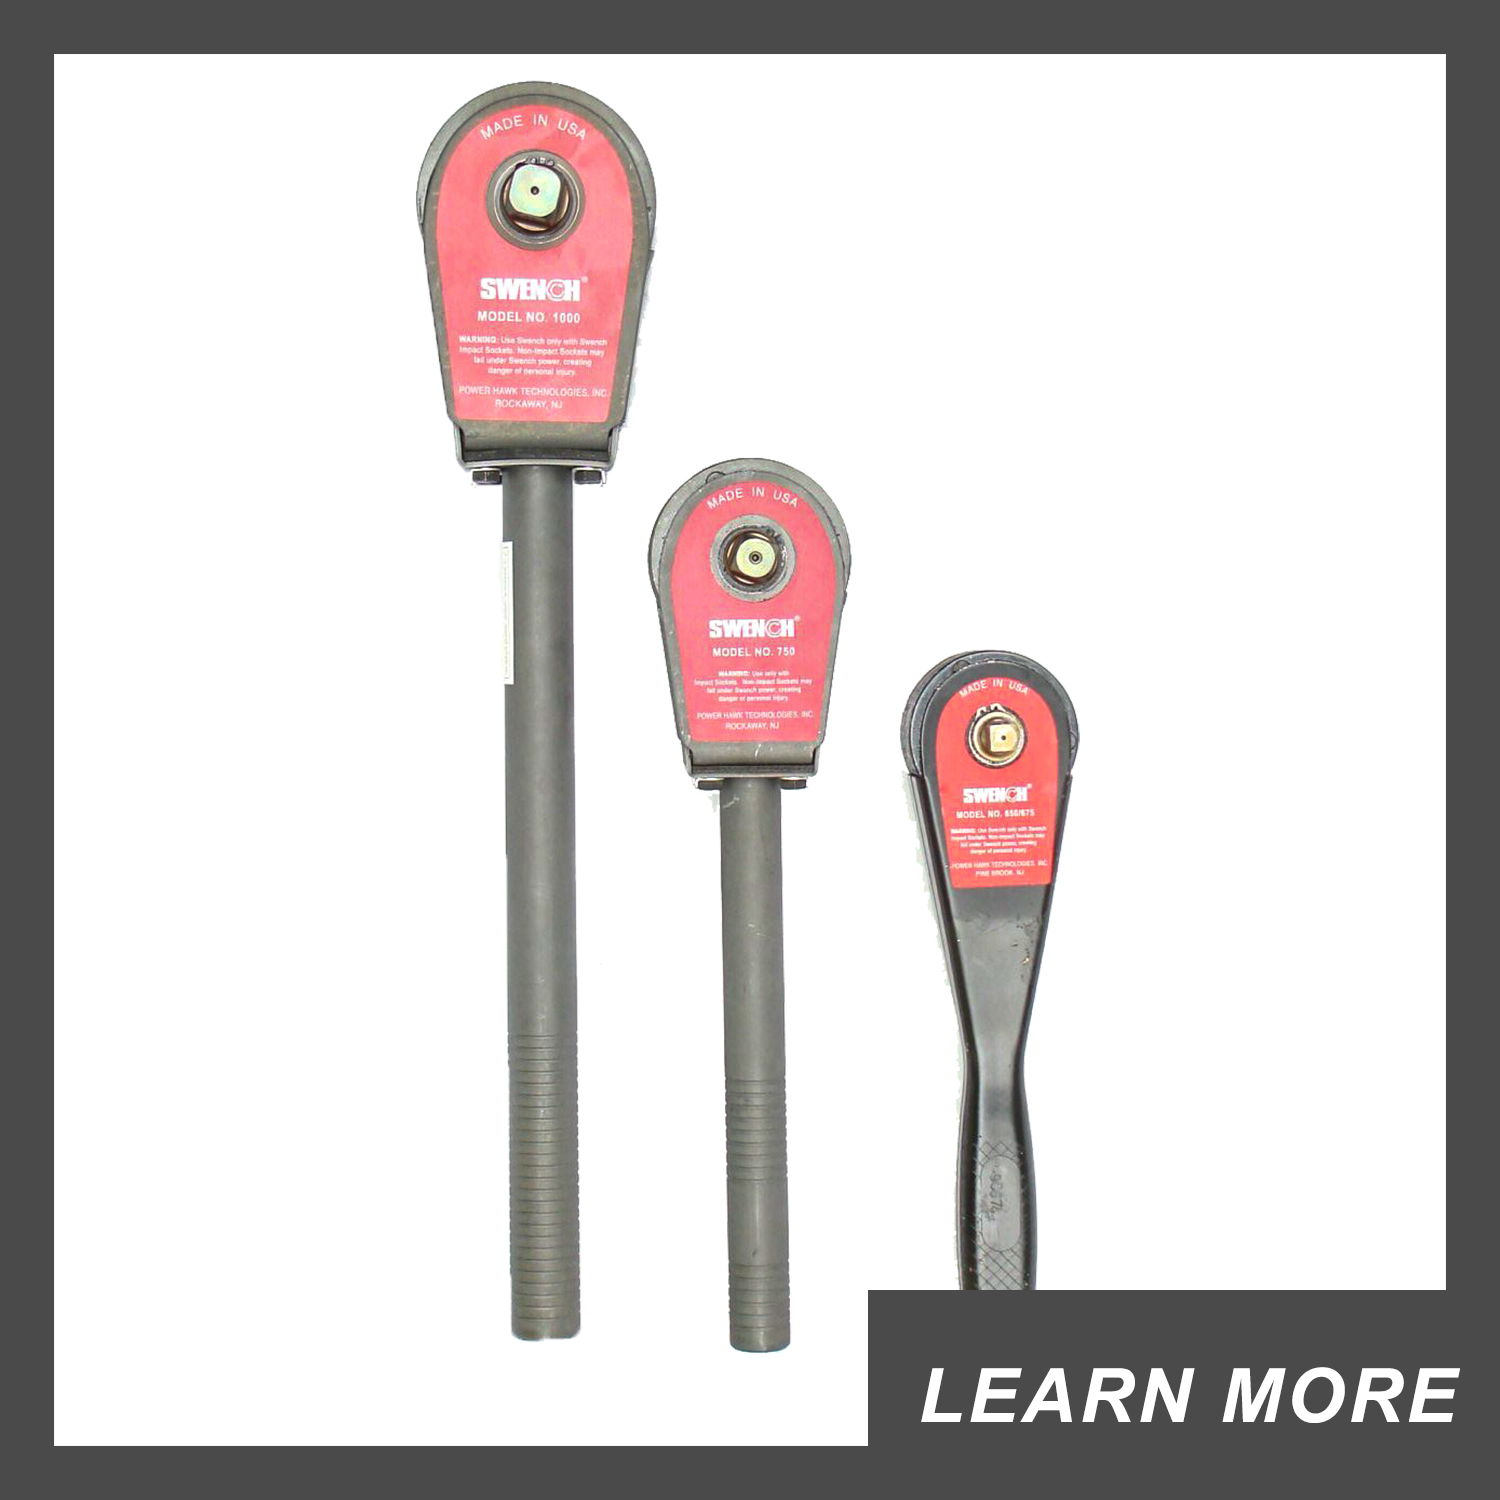 SWENCH Manual Impact Wrenches